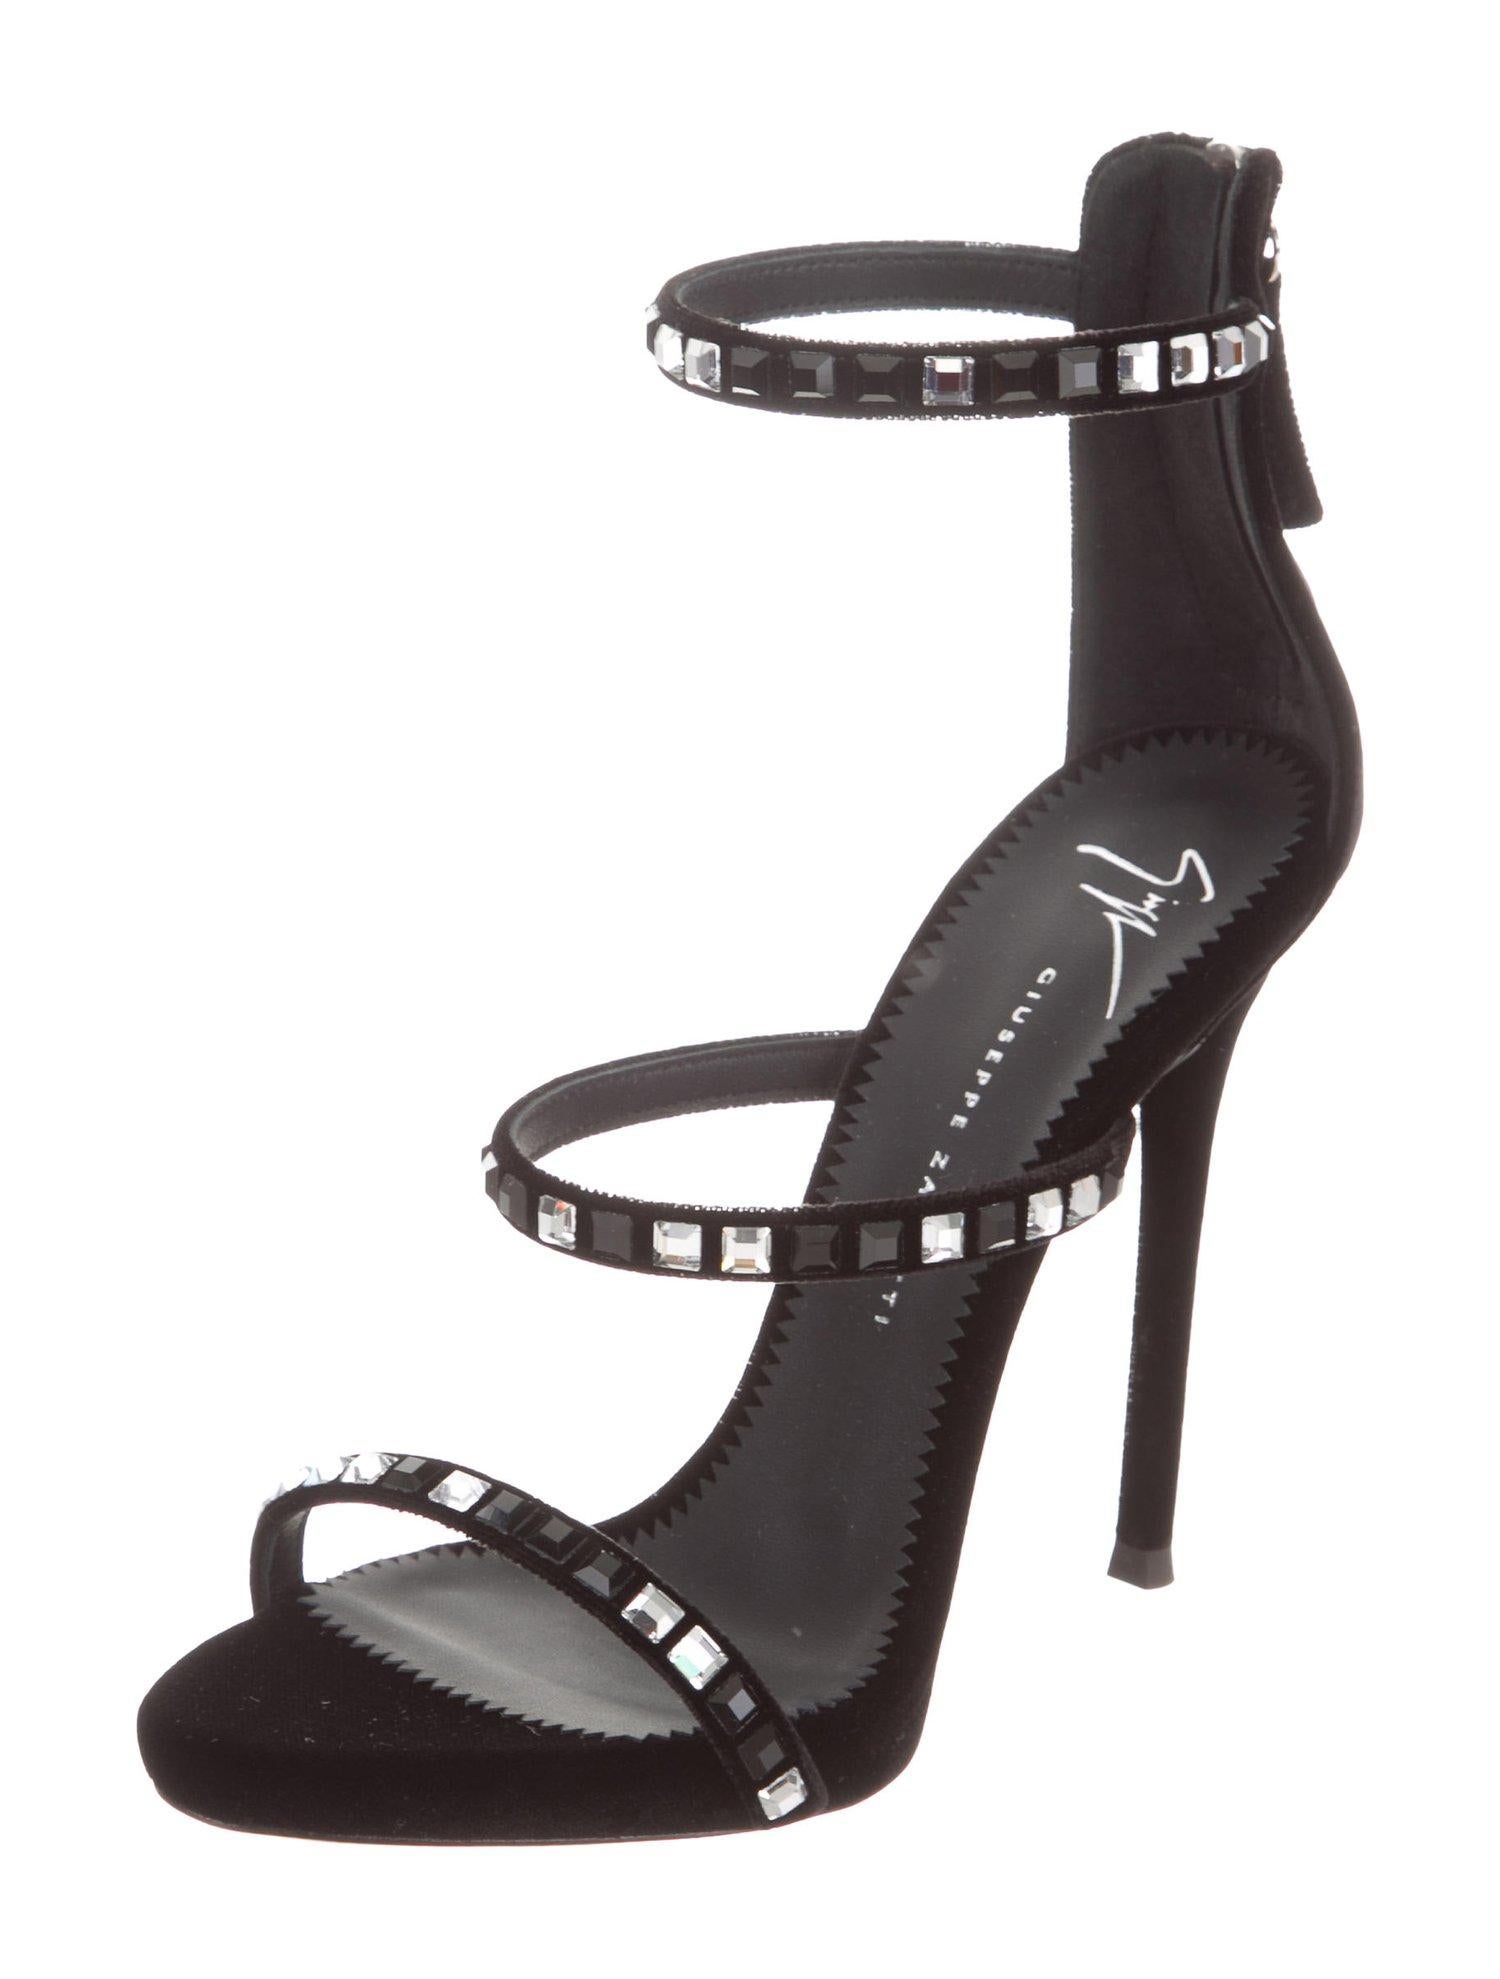 Giuseppe Zanotti NEW Black Suede Crystal Evening Sandals Heels in Box

Size IT 36
Suede
Crystal
Zipper back closure
Made in Italy
Heel height 4.75